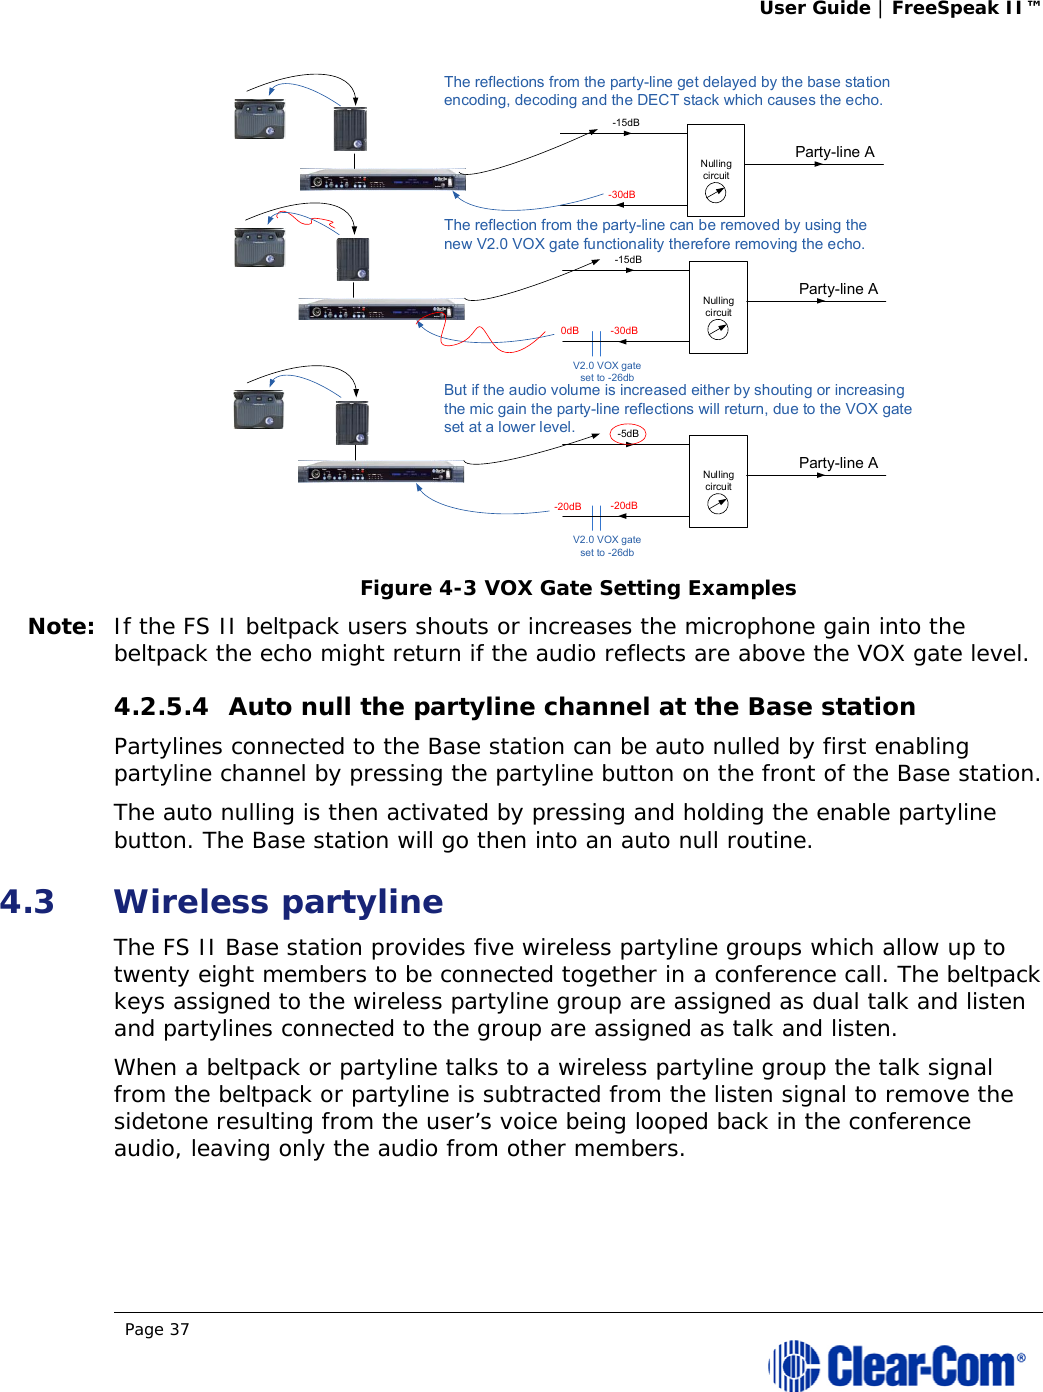 User Guide | FreeSpeak II™  Page 37   Figure 4-3 VOX Gate Setting Examples Note: If the FS II beltpack users shouts or increases the microphone gain into the beltpack the echo might return if the audio reflects are above the VOX gate level.  4.2.5.4 Auto null the partyline channel at the Base station Partylines connected to the Base station can be auto nulled by first enabling partyline channel by pressing the partyline button on the front of the Base station. The auto nulling is then activated by pressing and holding the enable partyline button. The Base station will go then into an auto null routine. 4.3 Wireless partyline The FS II Base station provides five wireless partyline groups which allow up to twenty eight members to be connected together in a conference call. The beltpack keys assigned to the wireless partyline group are assigned as dual talk and listen and partylines connected to the group are assigned as talk and listen. When a beltpack or partyline talks to a wireless partyline group the talk signal from the beltpack or partyline is subtracted from the listen signal to remove the sidetone resulting from the user’s voice being looped back in the conference audio, leaving only the audio from other members. Party-line A Nulling circuit -15dB-30dBThe reflections from the party-line get delayed by the base station encoding, decoding and the DECT stack which causes the echo. V2.0 VOX gate set to -26db 0dBParty-line A Nulling circuit -15dB-30dBV2.0 VOX gate set to -26db  -20dBParty-line A Nulling circuit -5dB-20dBThe reflection from the party-line can be removed by using the new V2.0 VOX gate functionality therefore removing the echo. But if the audio volume is increased either by shouting or increasing the mic gain the party-line reflections will return, due to the VOX gate set at a lower level. 